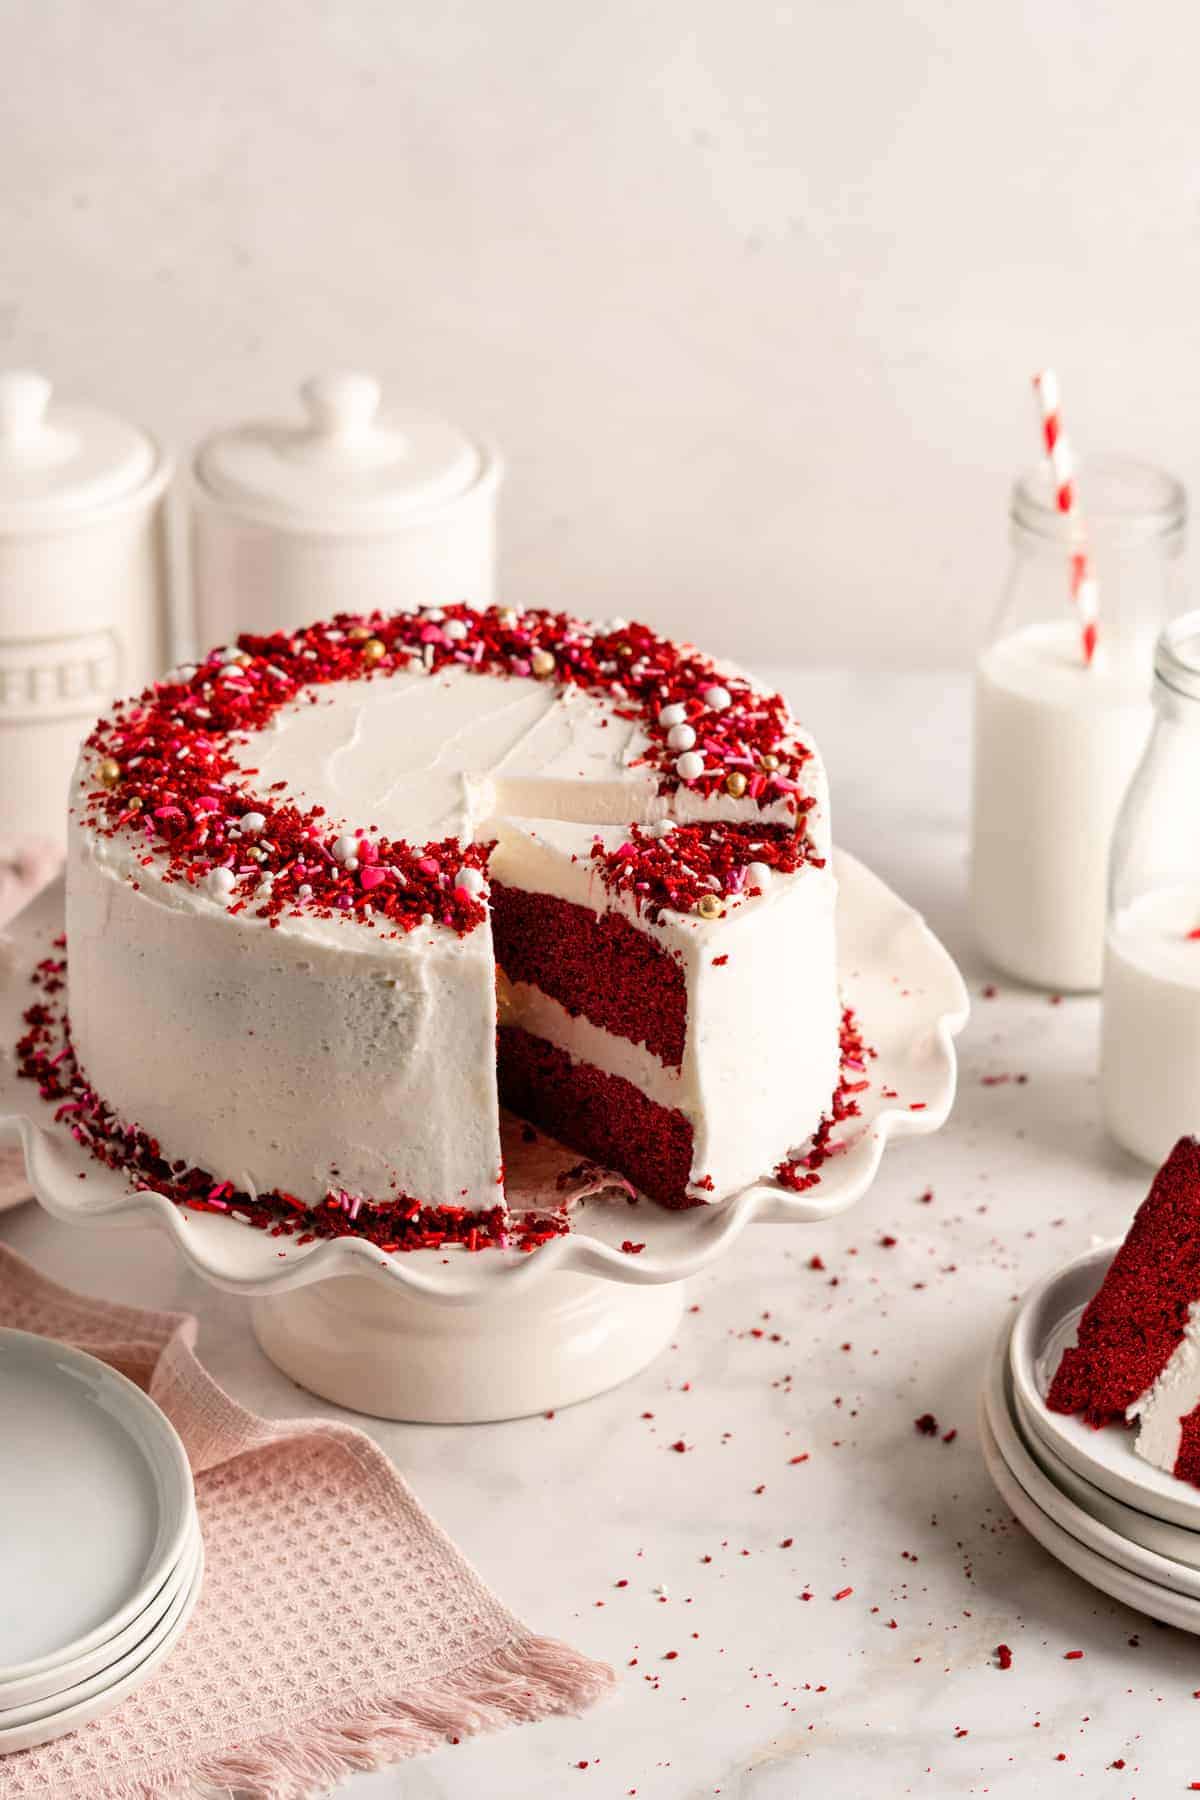 Vegan red velvet cake on cake stand with slice being removed